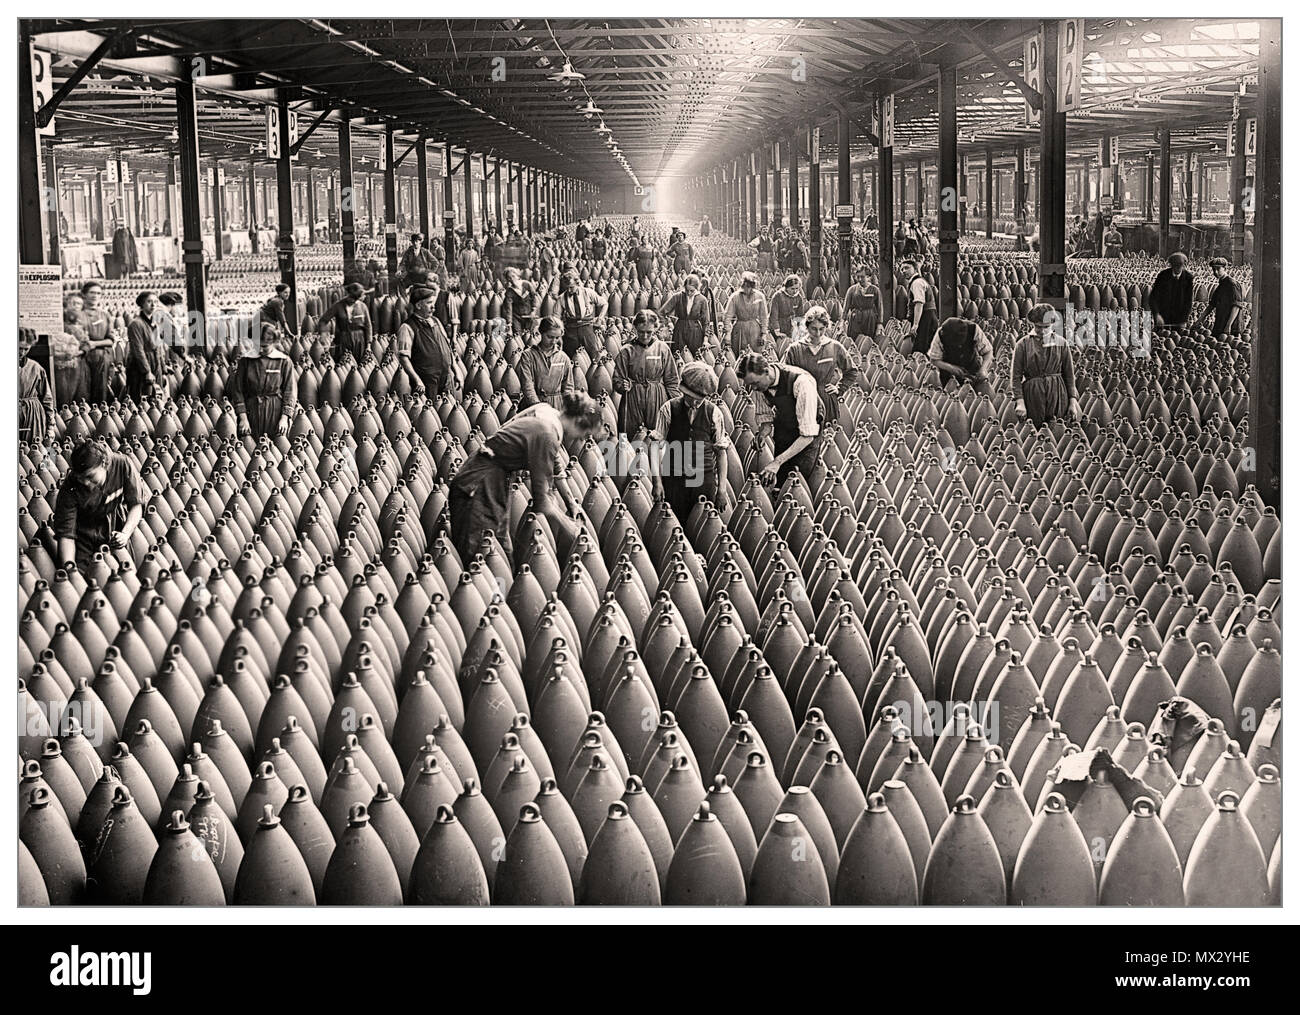 World War 1 Shells Ammunitions Factory UK The Chilwell munitions filling factory, Britain, WW1 More than 19 million shells were filled with explosives here by 10,000 workers between 1915-1918, during World War 1. The factory filled over half of all British shells during WW1 the Great War. Stock Photo